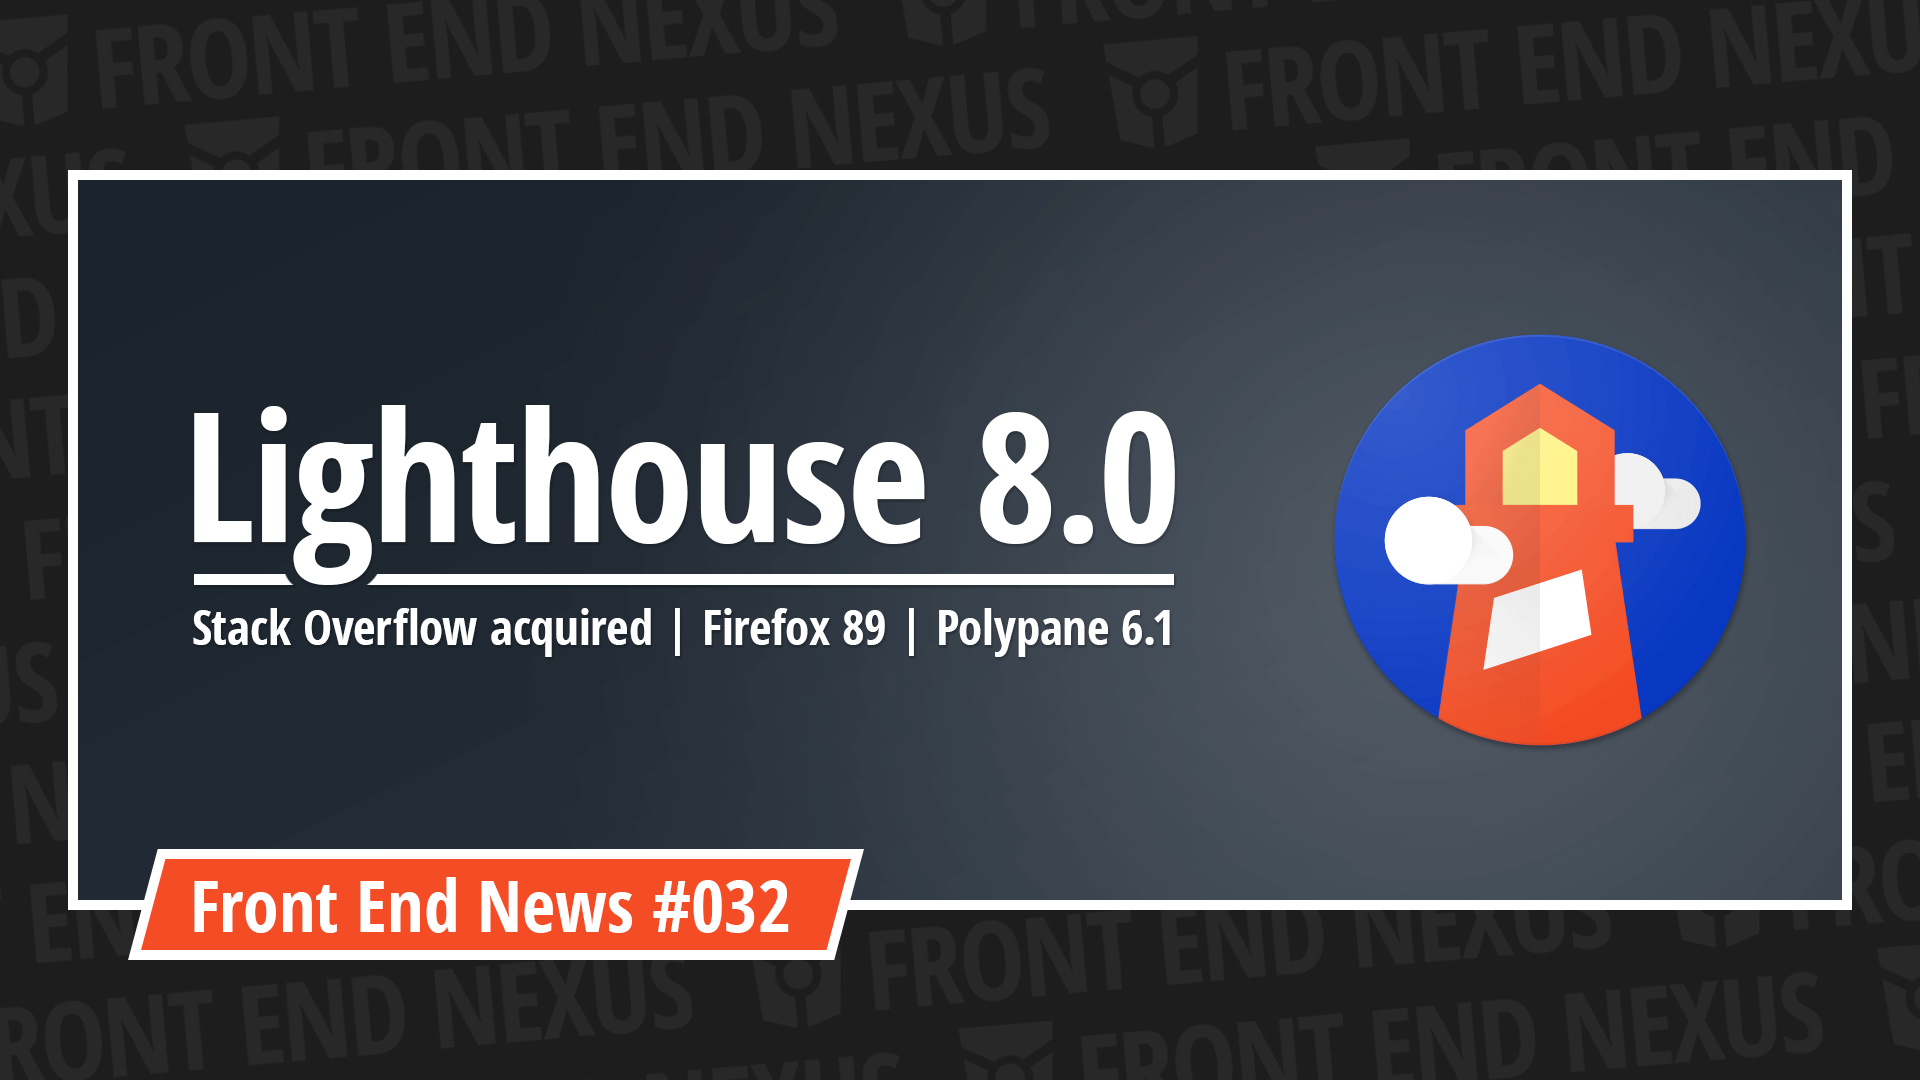 Lighthouse 8.0, Stack Overflow acquired, Firefox 89, and Polypane 6.1 | Front End News #032